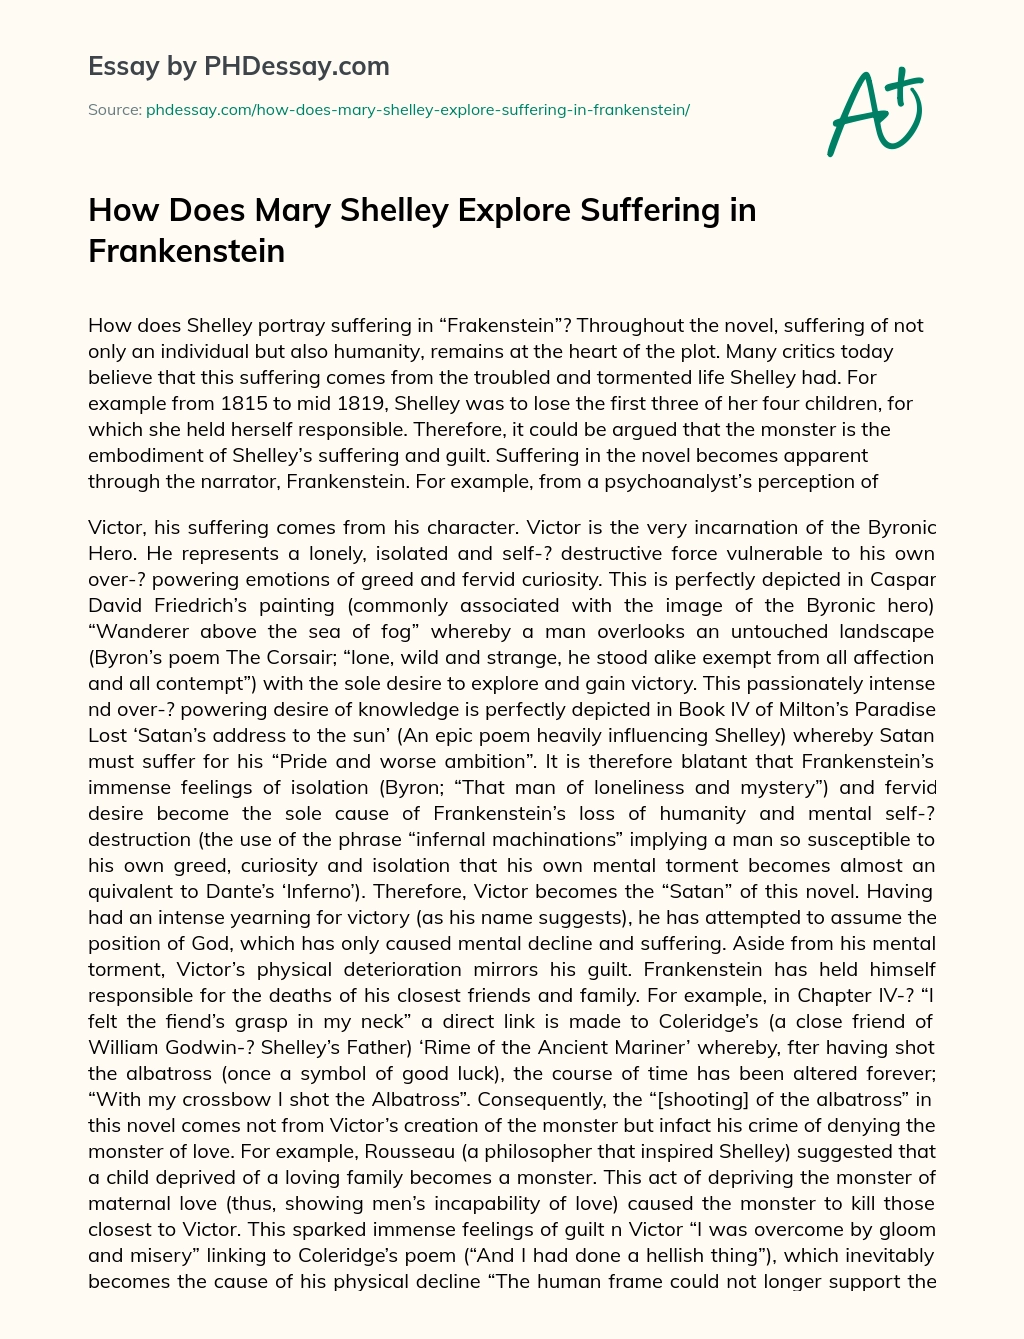 How Does Mary Shelley Explore Suffering in Frankenstein essay